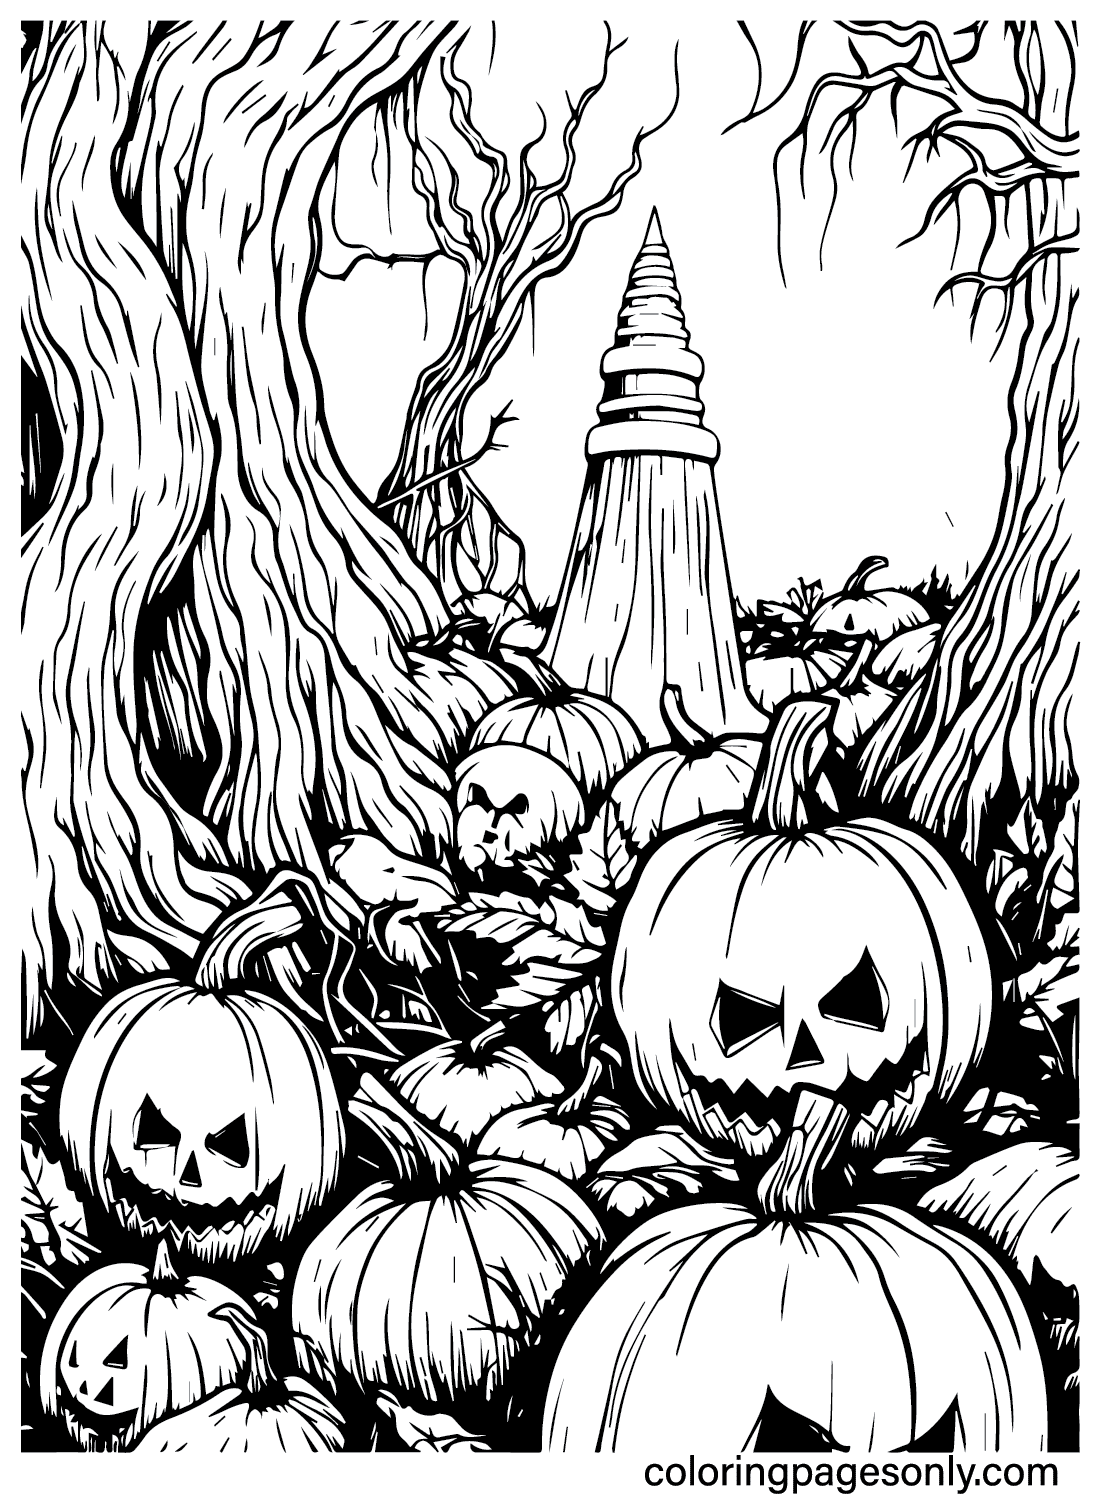 Super Scary Halloween Coloring Page - Free Printable Coloring Pages